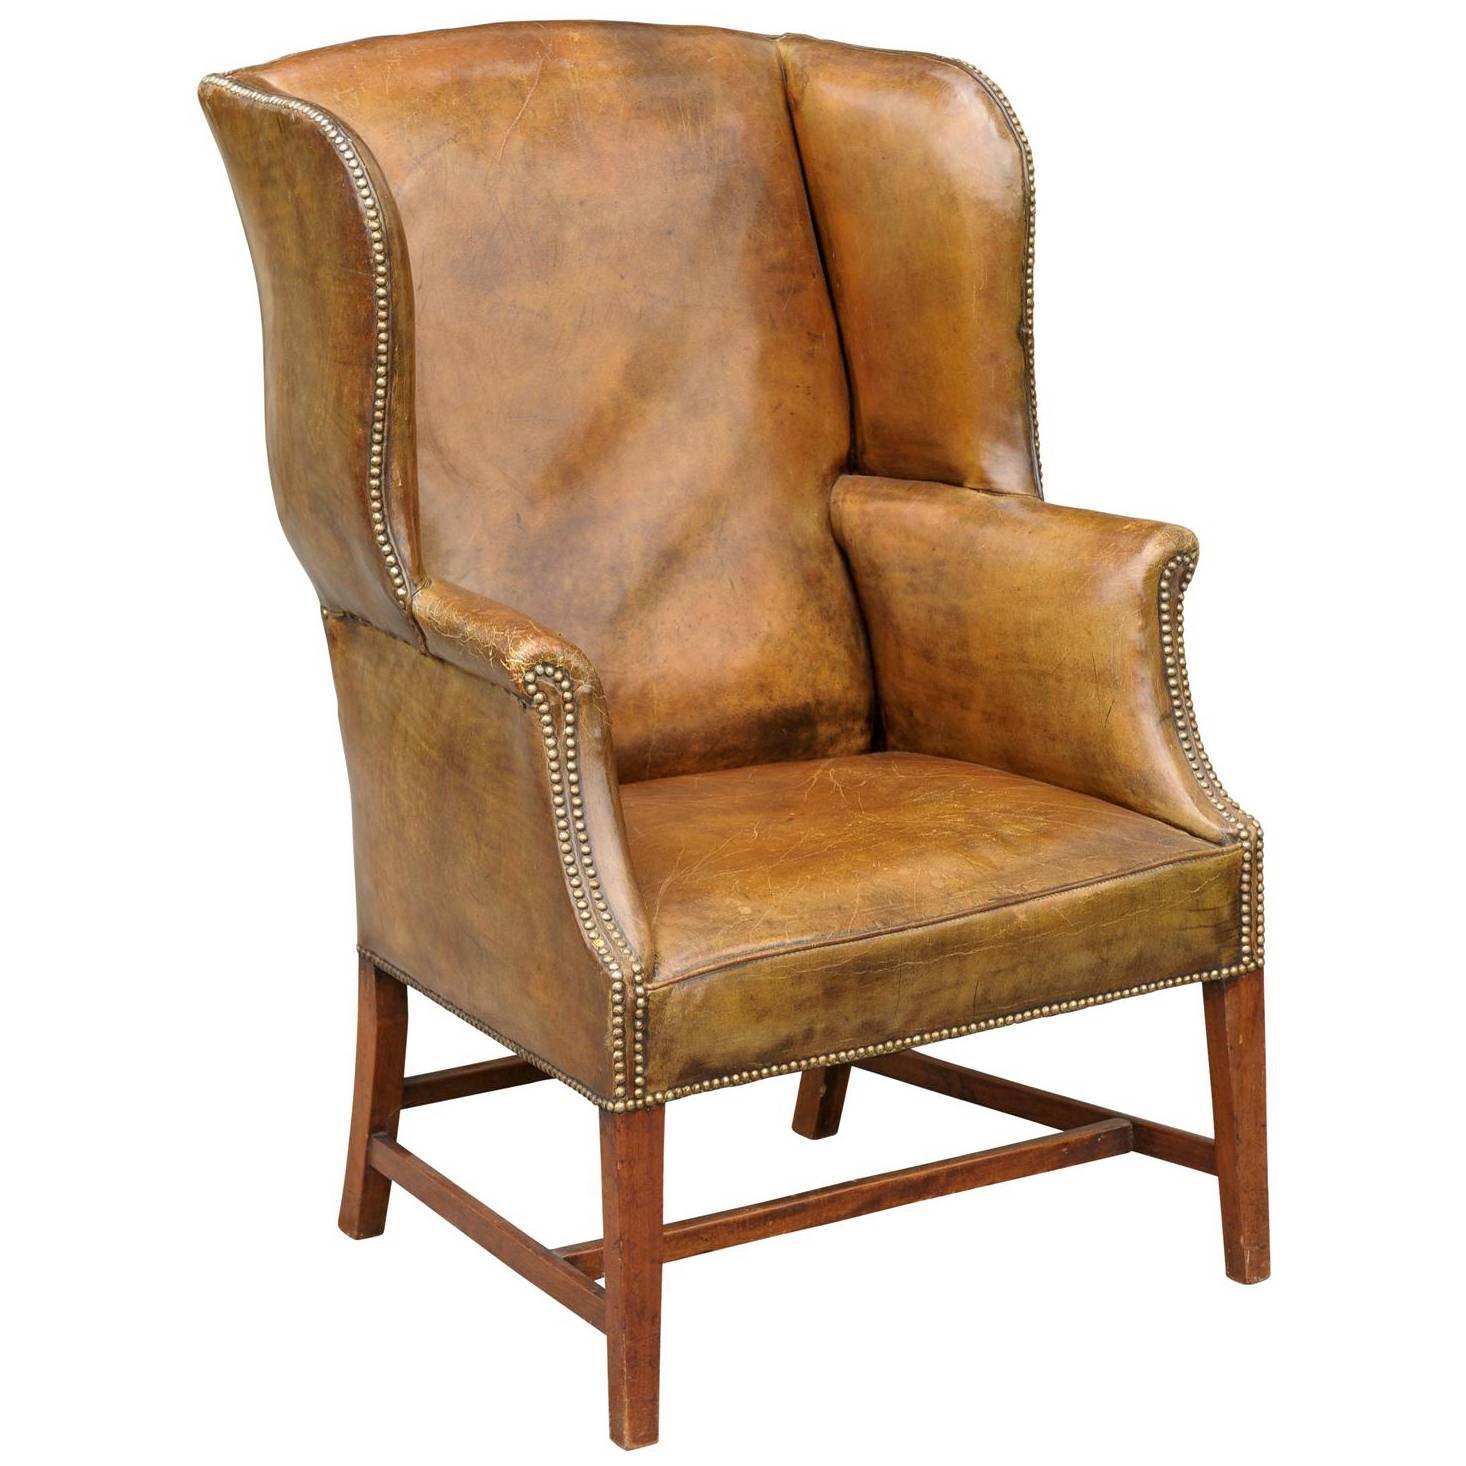 19 th c.English Leather Wing Chair